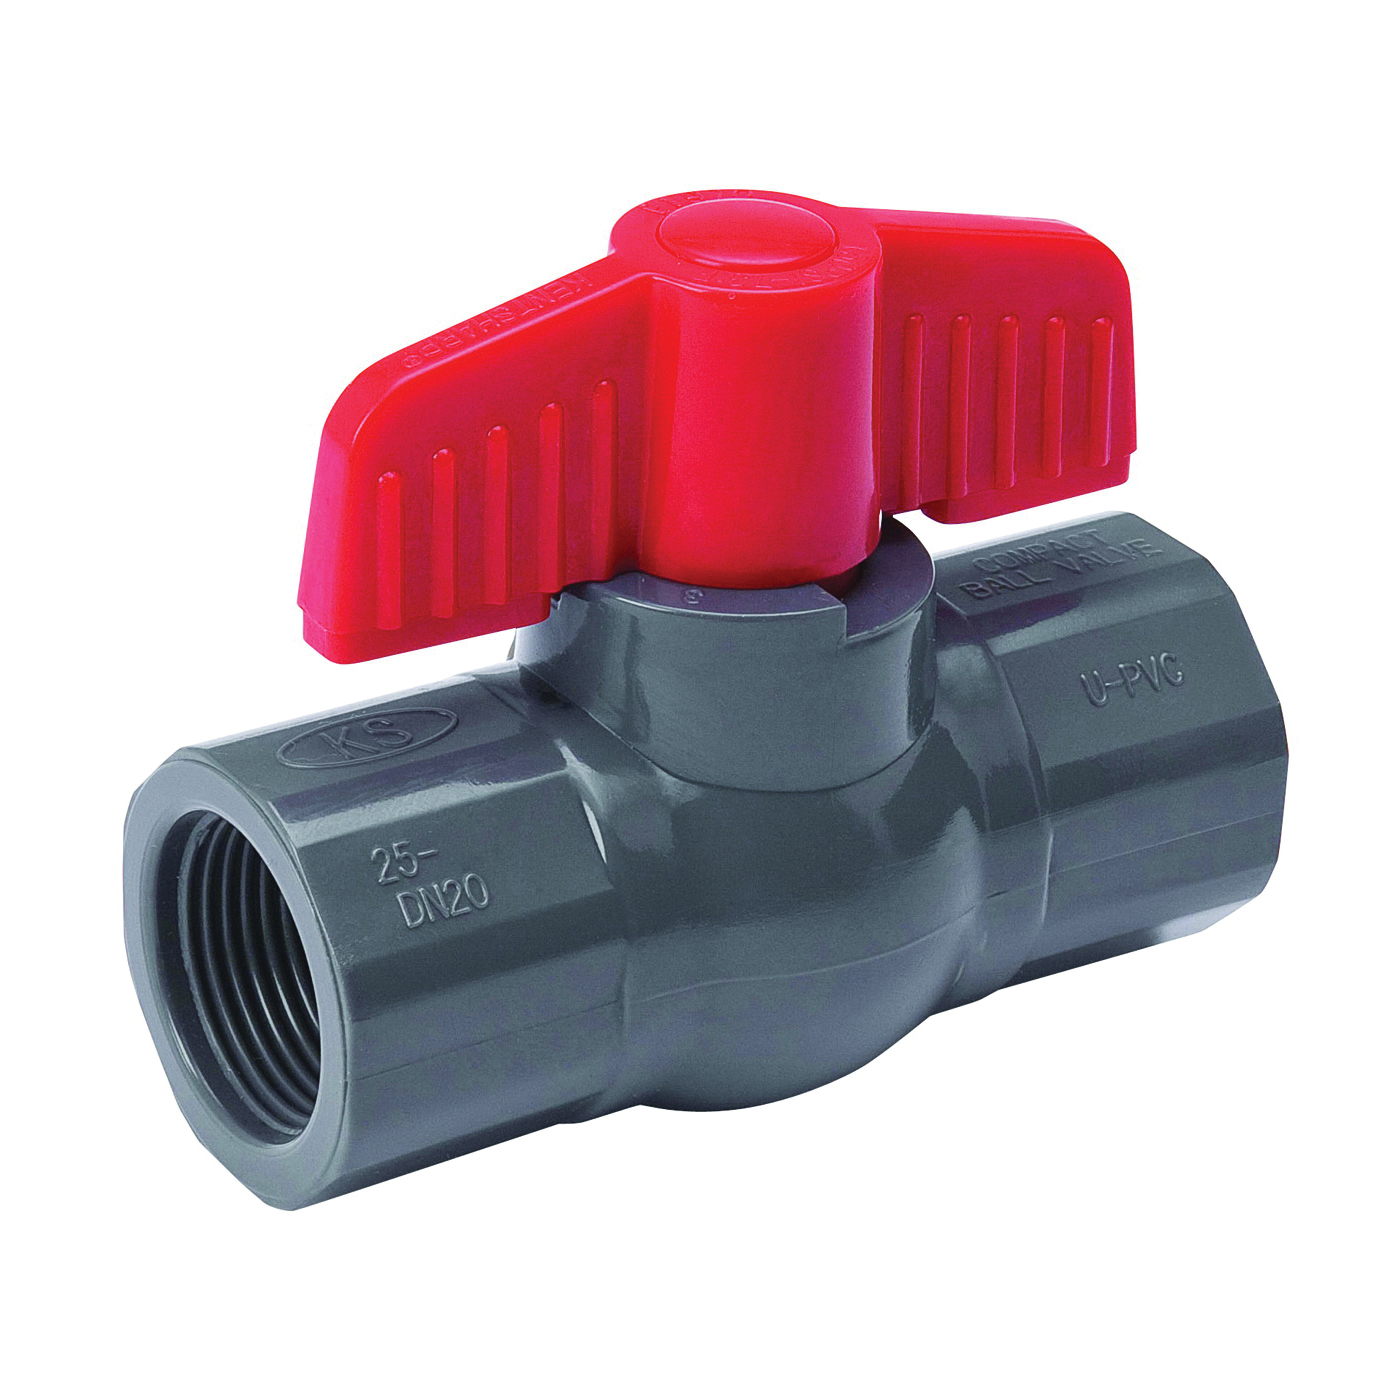 107-106 Ball Valve, 1-1/4 in Connection, FPT x FPT, 150 psi Pressure, PVC Body